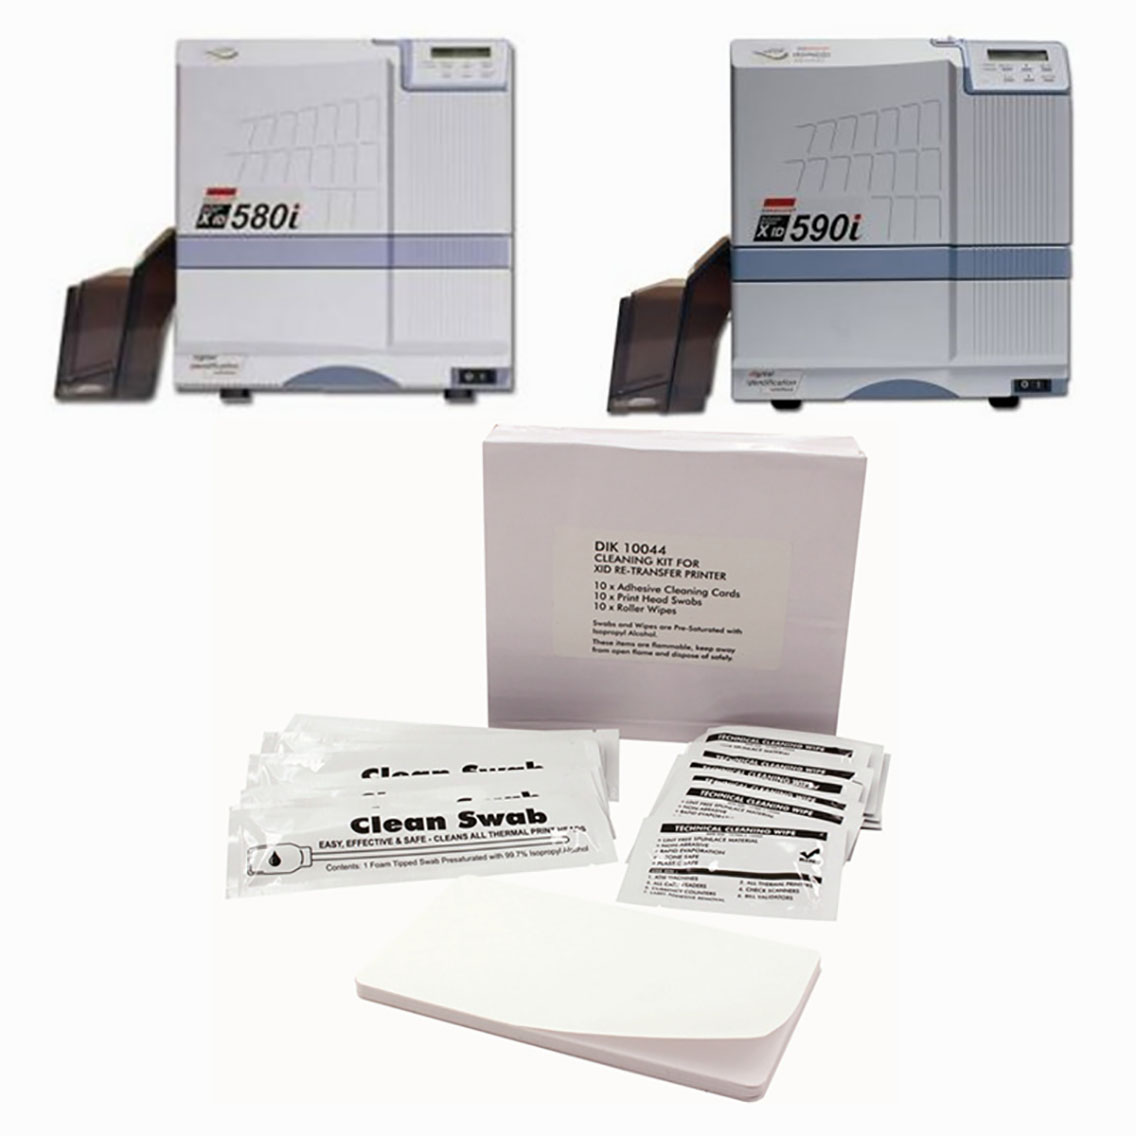 Cleanmo good quality inkjet printhead cleaning kit manufacturer for XID 580i printer-3